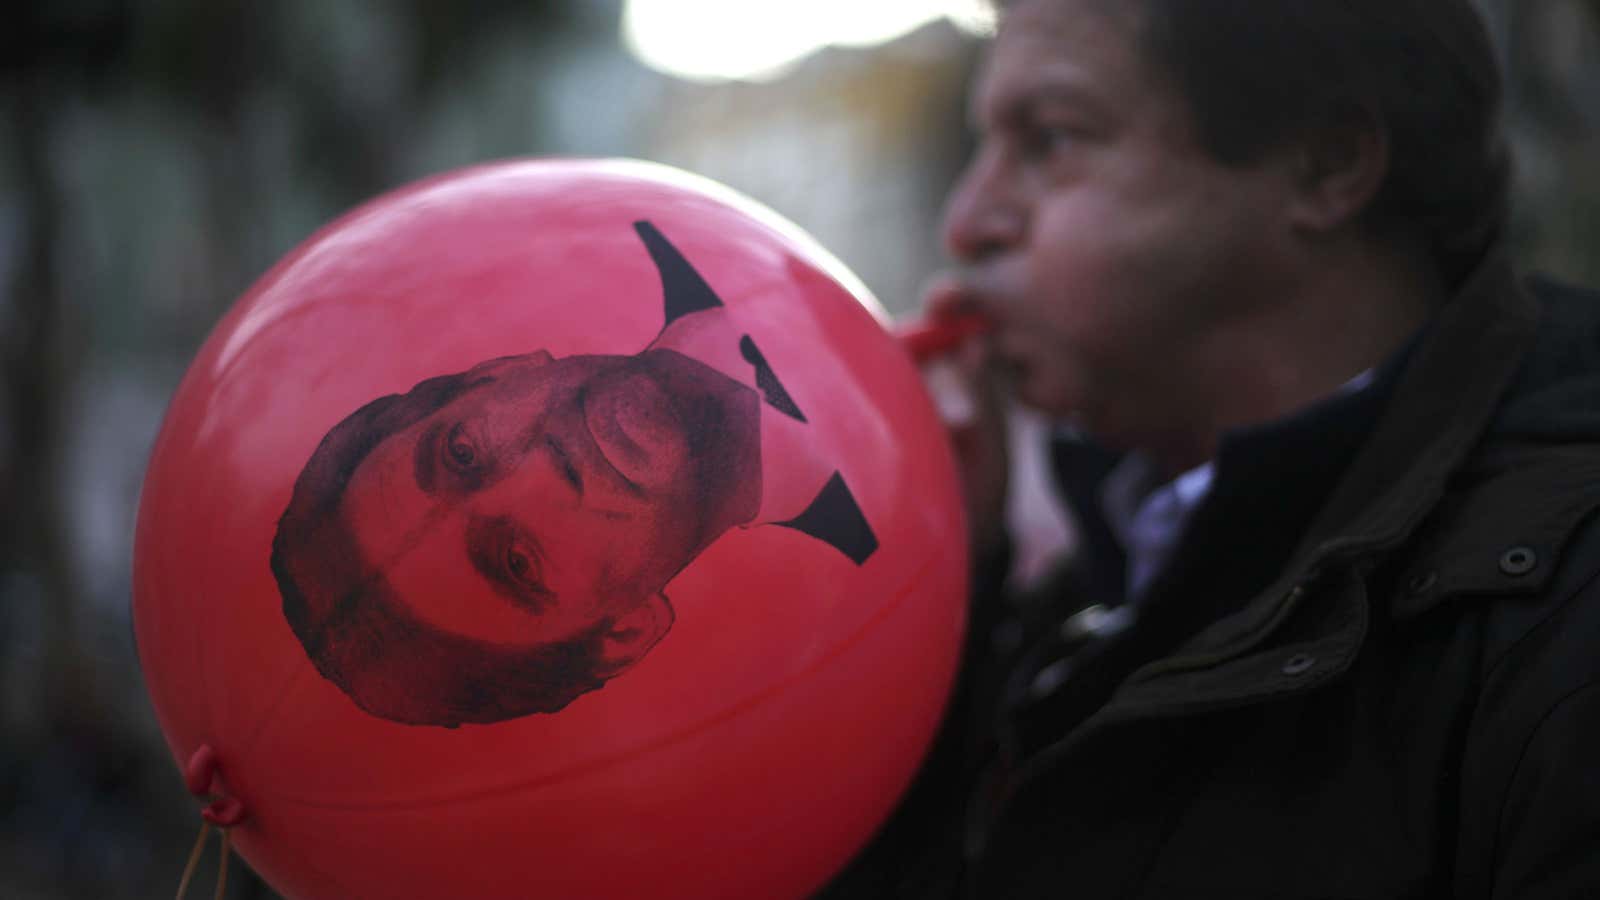 Anger at Portuguese Prime Minister Pedro Passos Coelho over austerity is blowing up.